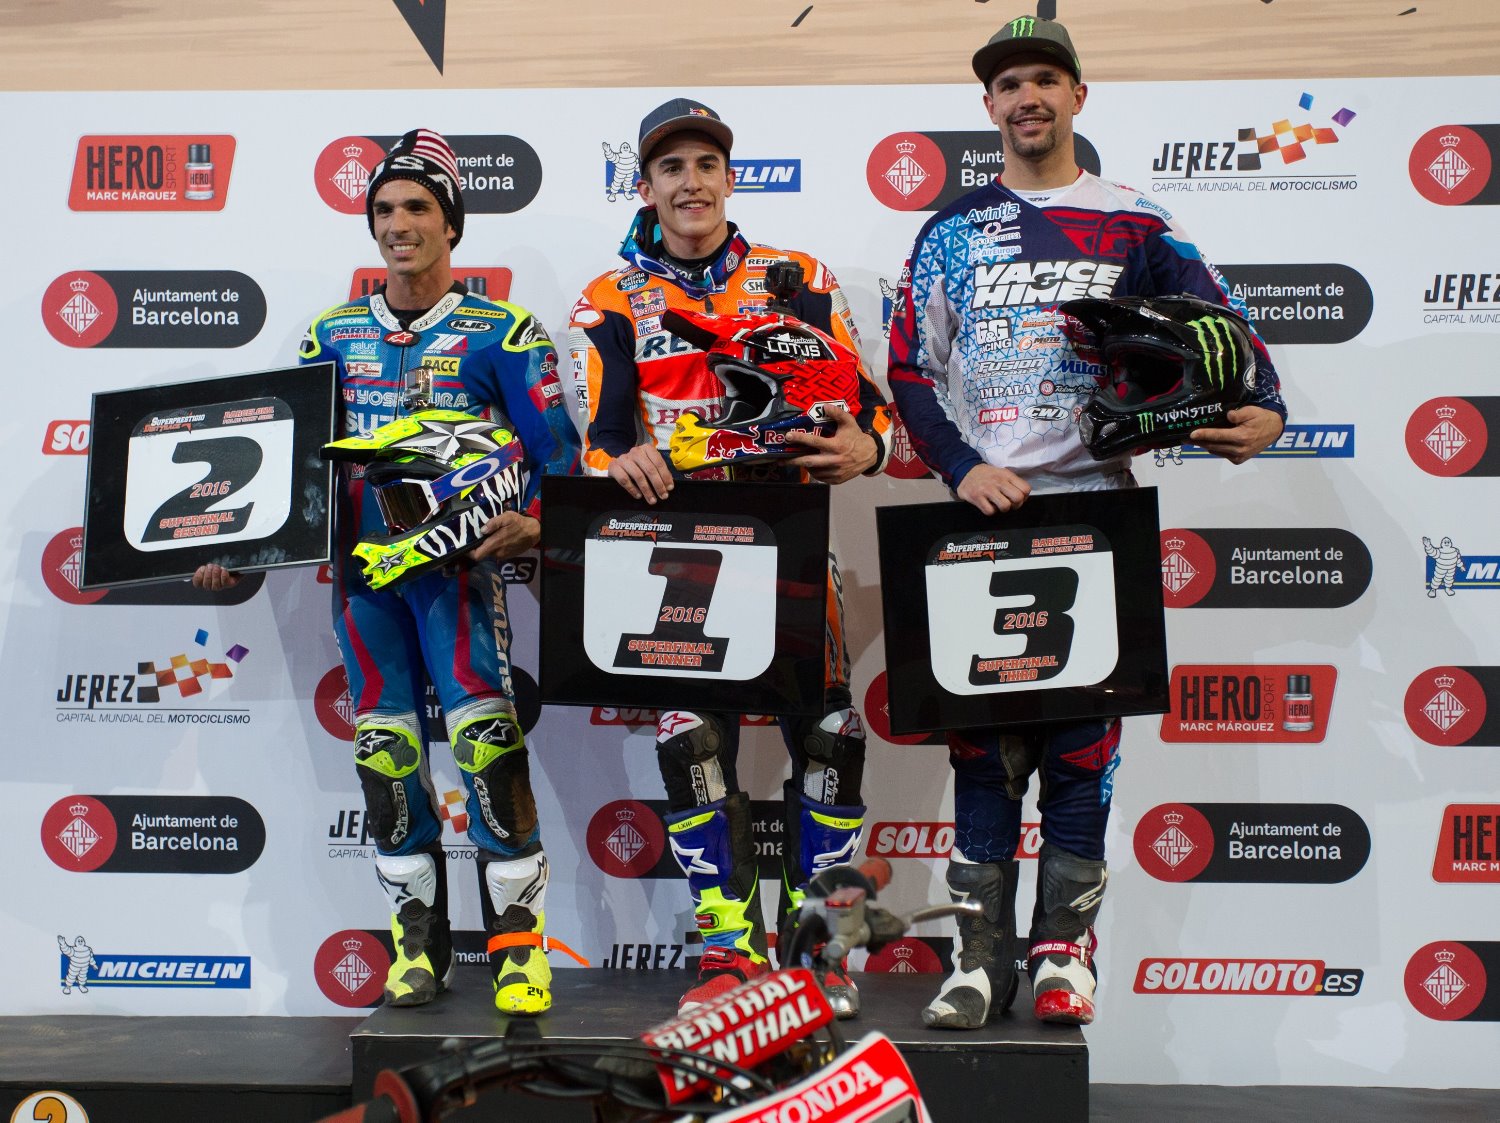 Marquez (C) was the winner but American Brad Baker (R) dwarfs the two Spanish midgets, Carry 50 pounds more weight because of his size means he had no chance